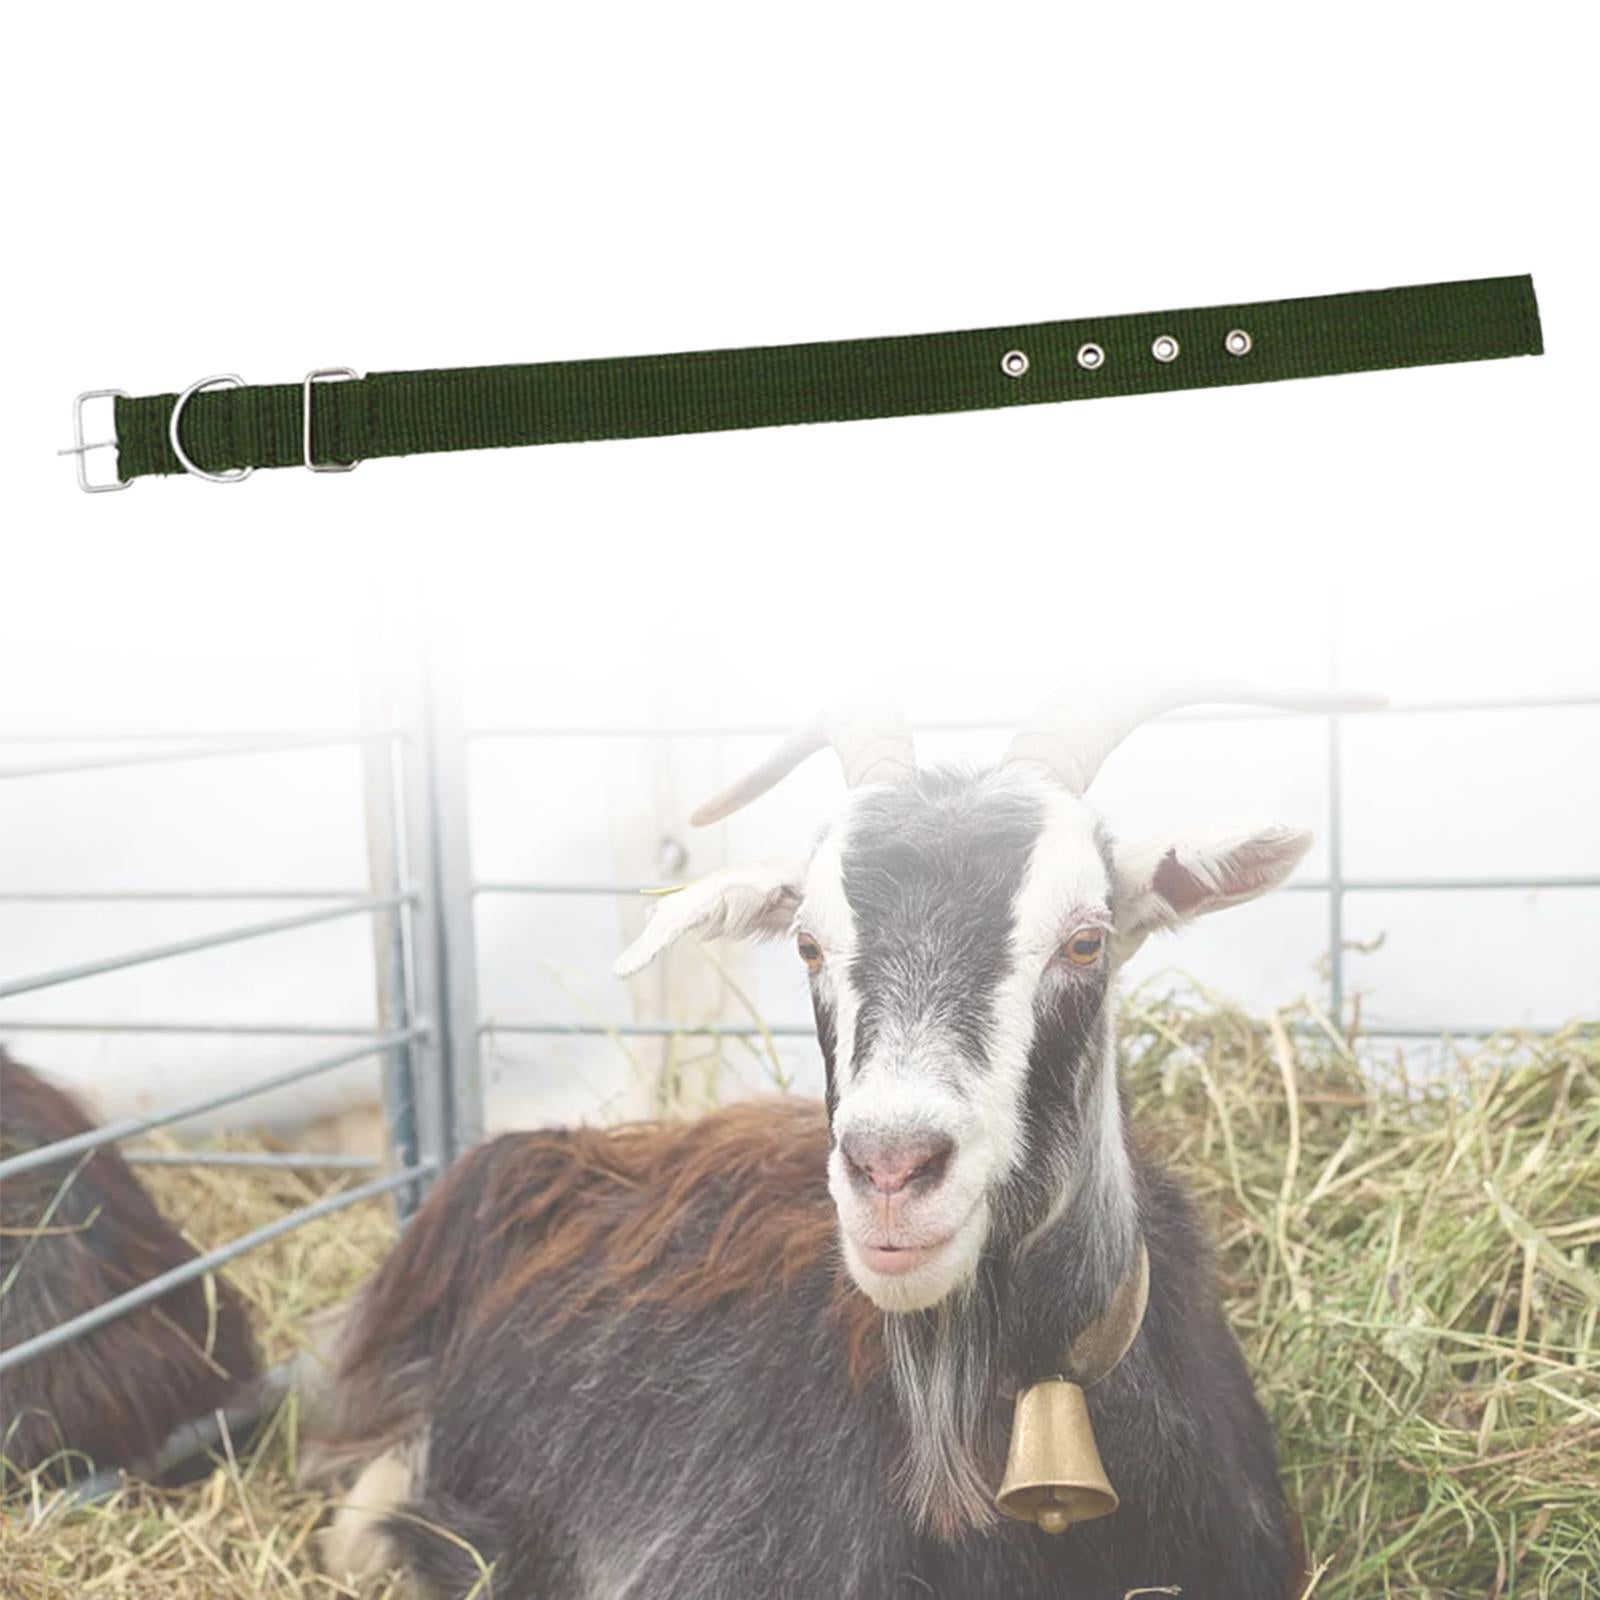 Portable Cow Neck Strap Thicken Sturdy Canvas for Farm Animal Sheep Horse 20in